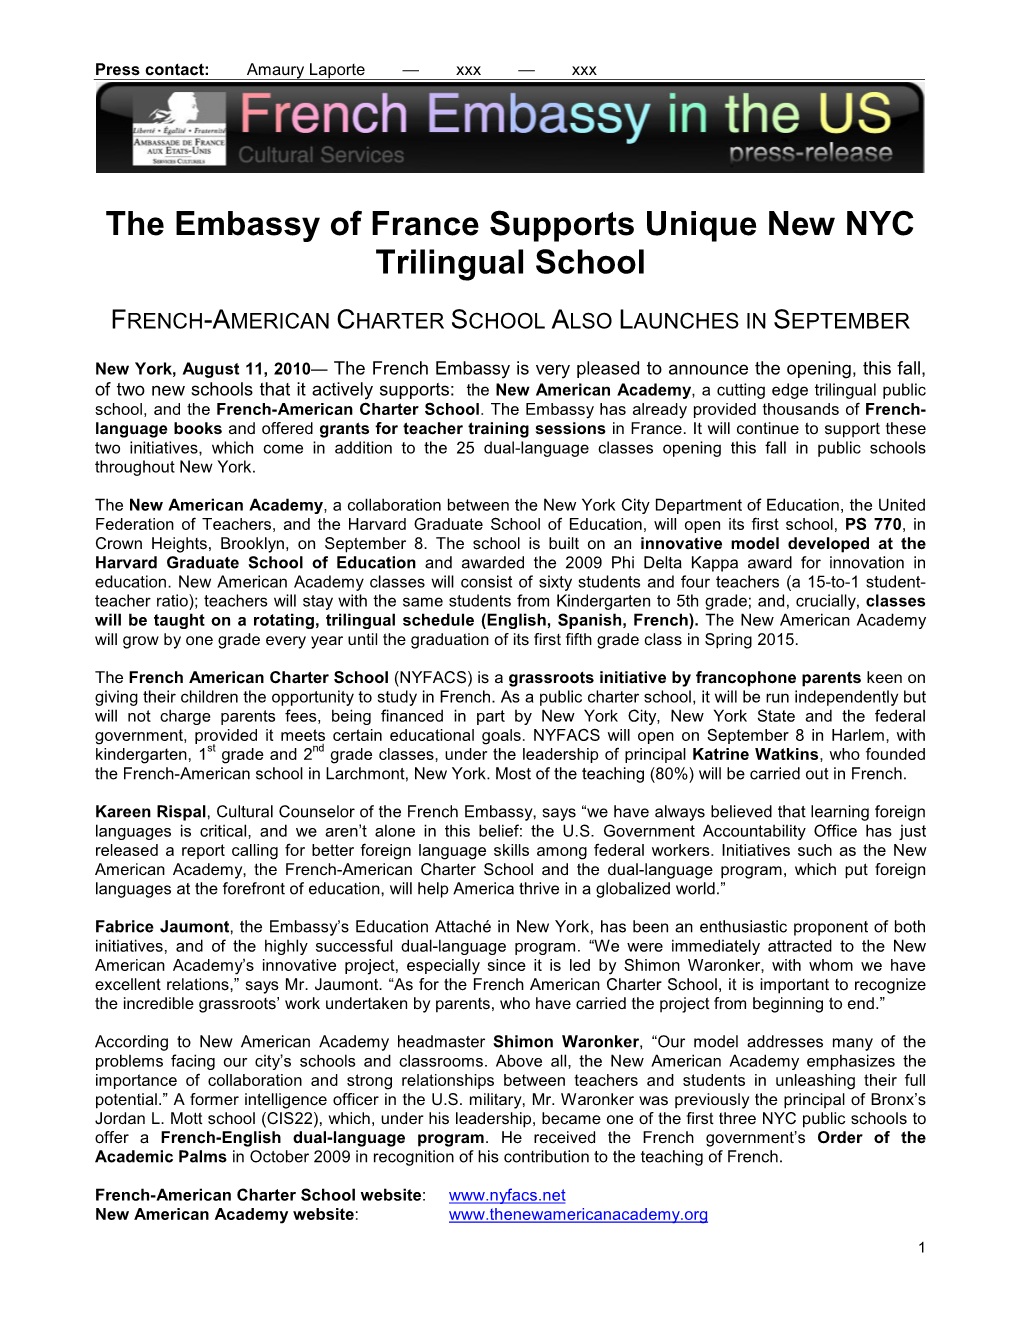 The Embassy of France Supports Unique New NYC Trilingual School